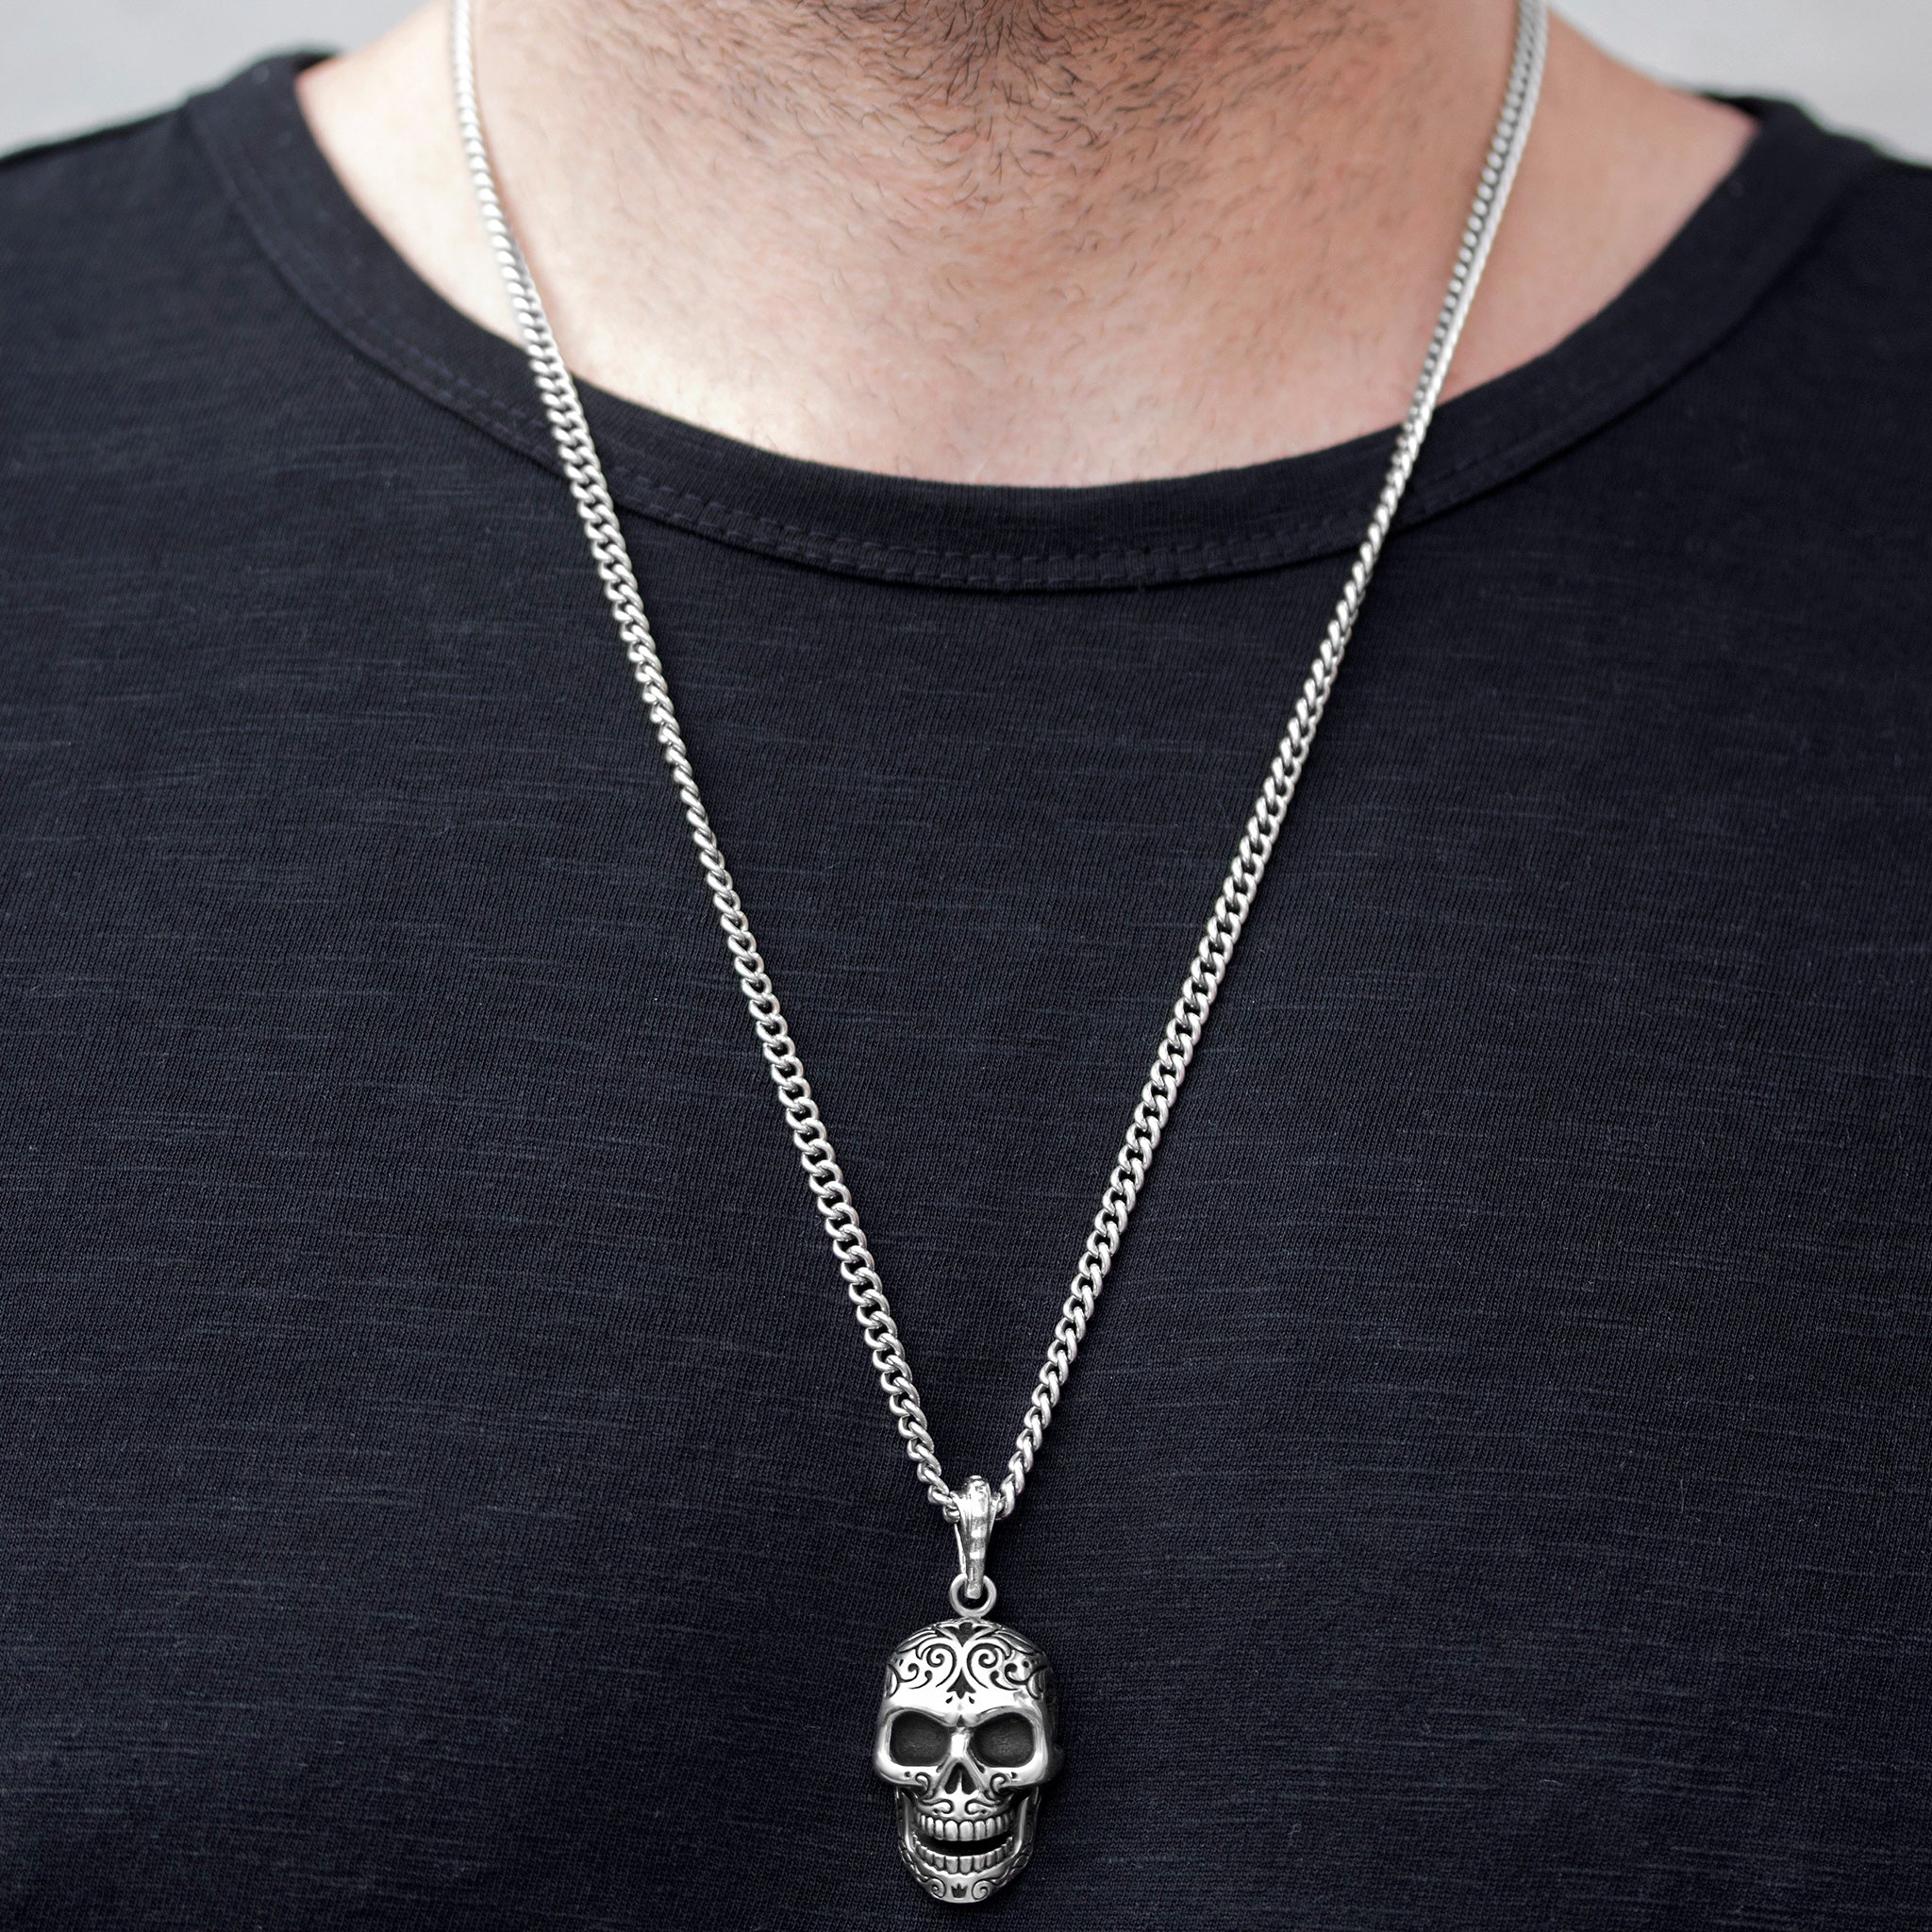 Laughing Skull with Movable Jaw Pendant